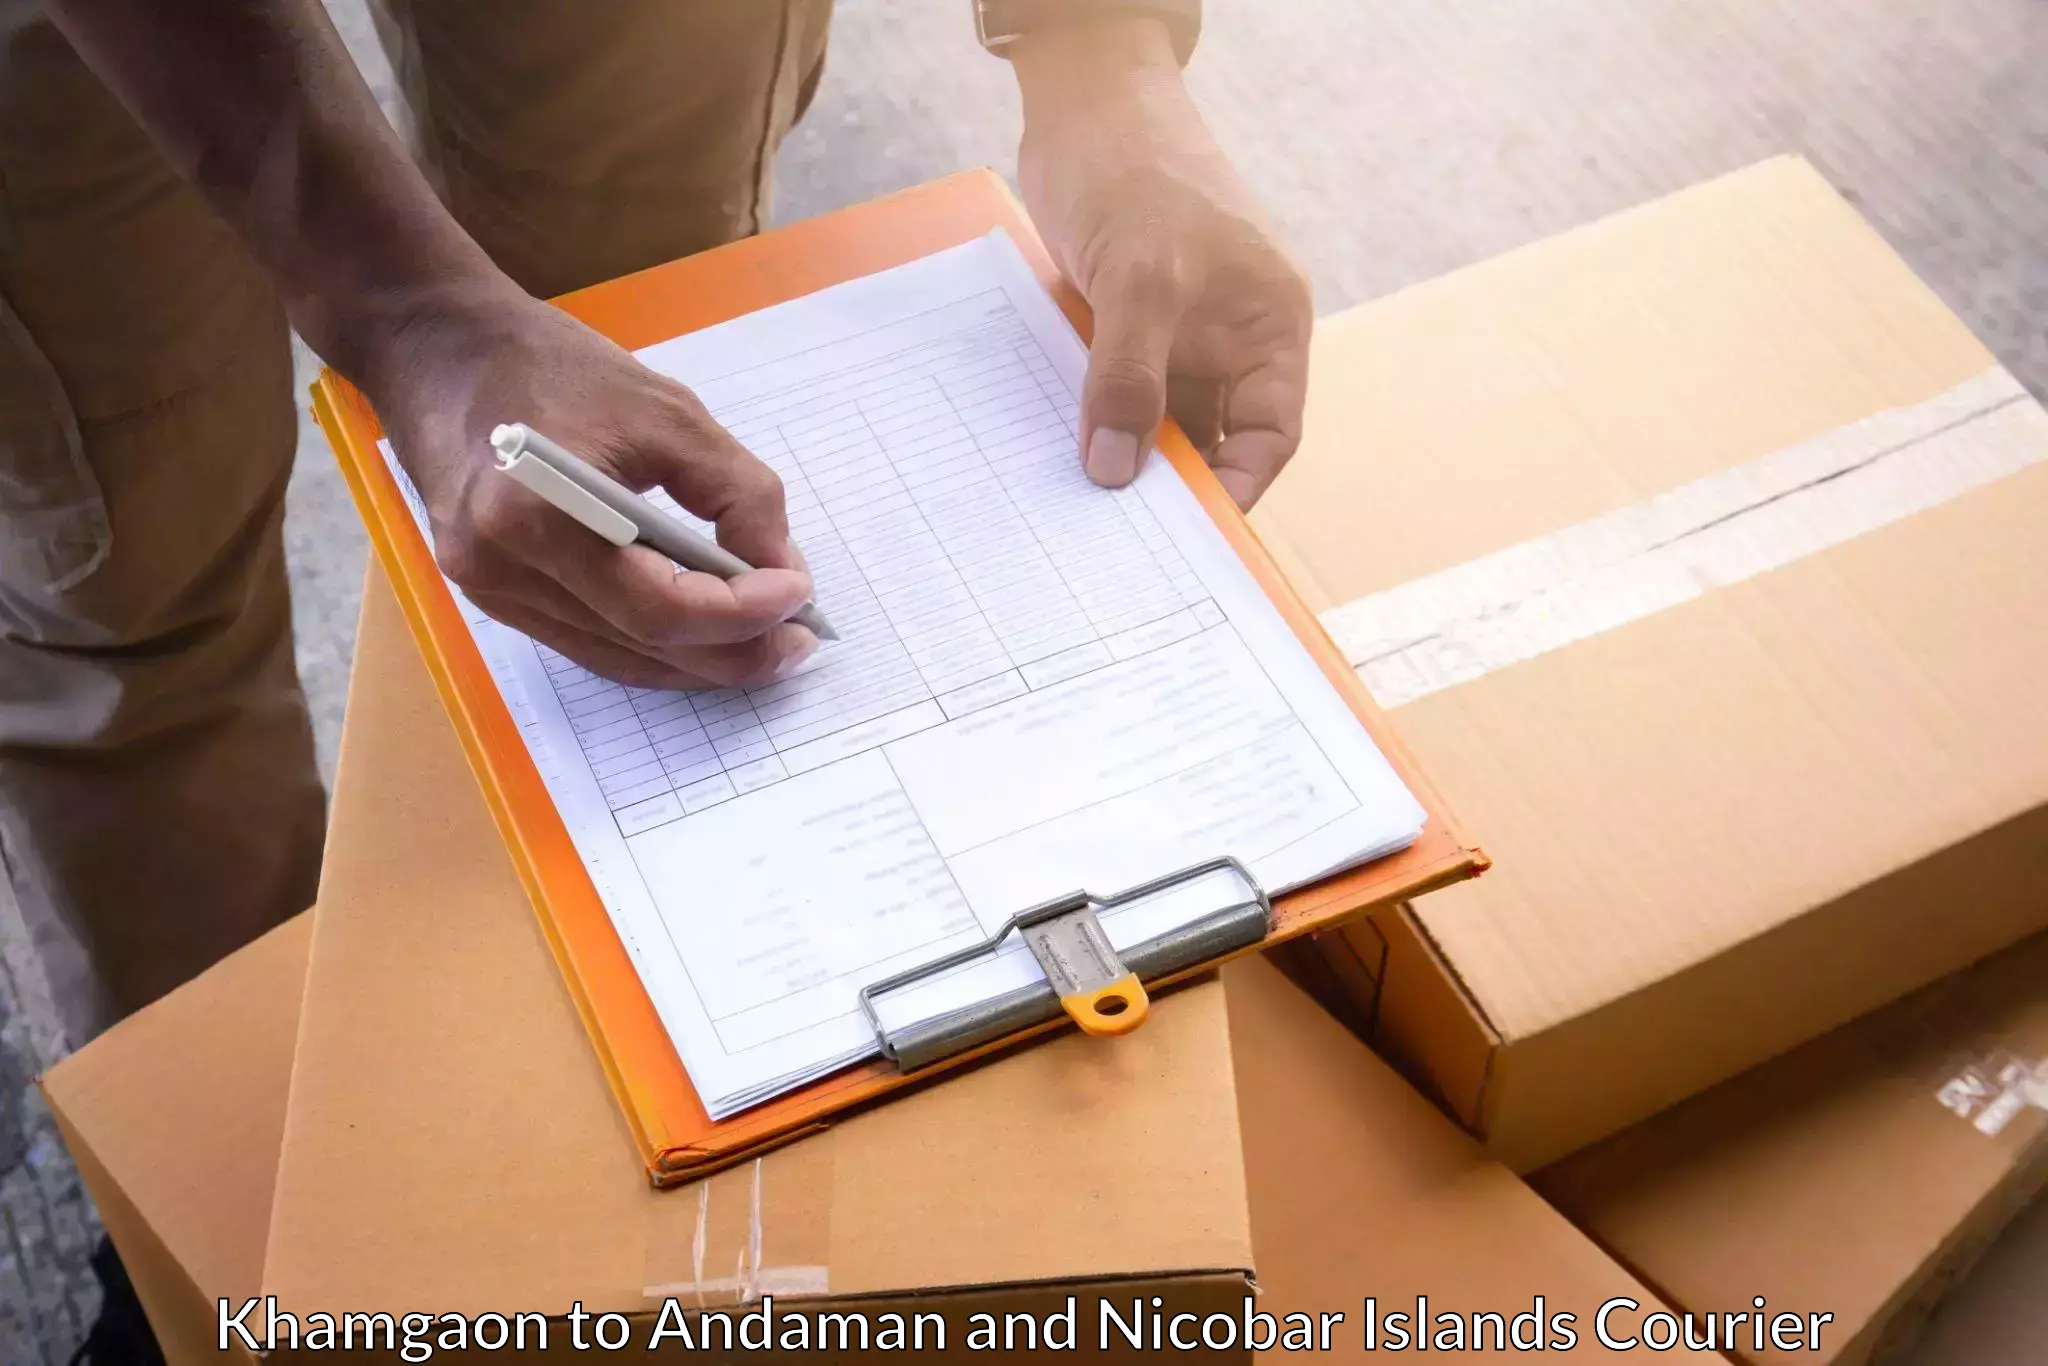 Smart parcel tracking in Khamgaon to Andaman and Nicobar Islands